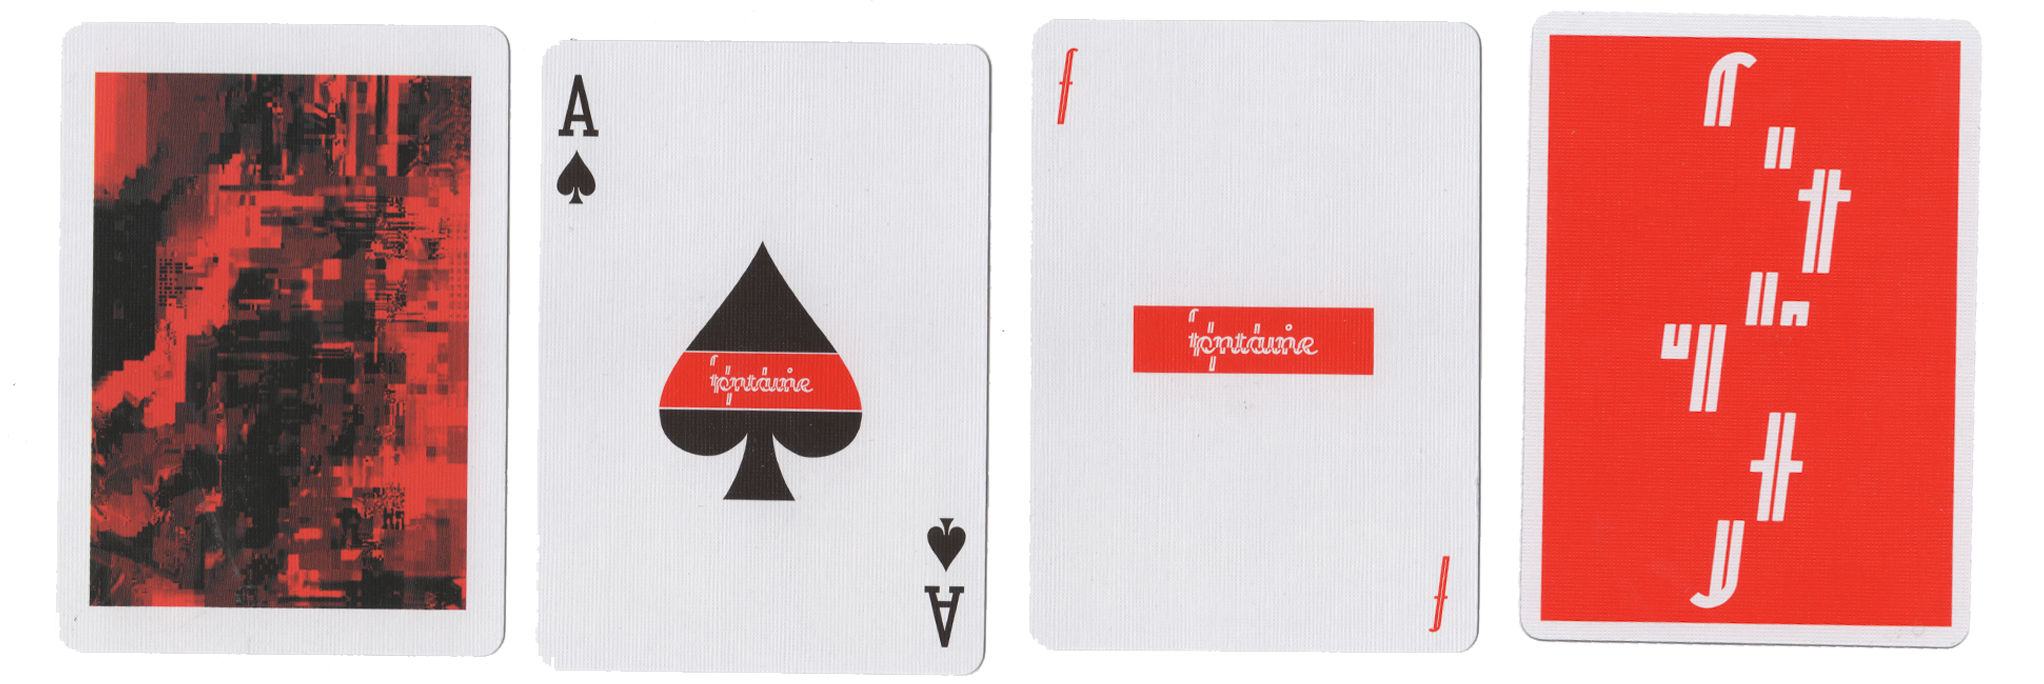 Fontaine Futures — FONTAINE CARDS